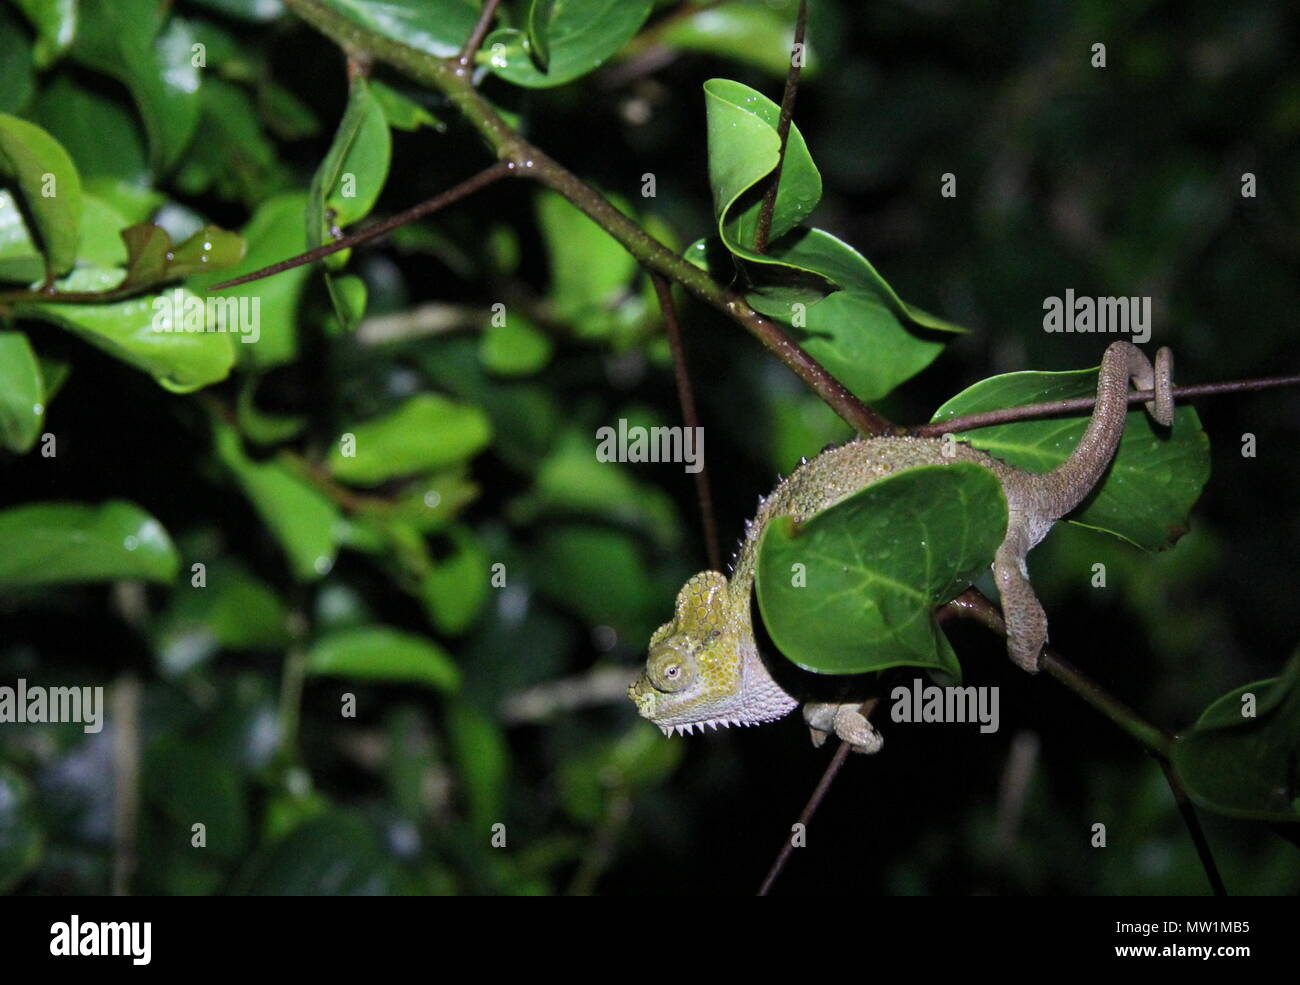 Chameleon sitting in a tree Stock Photo